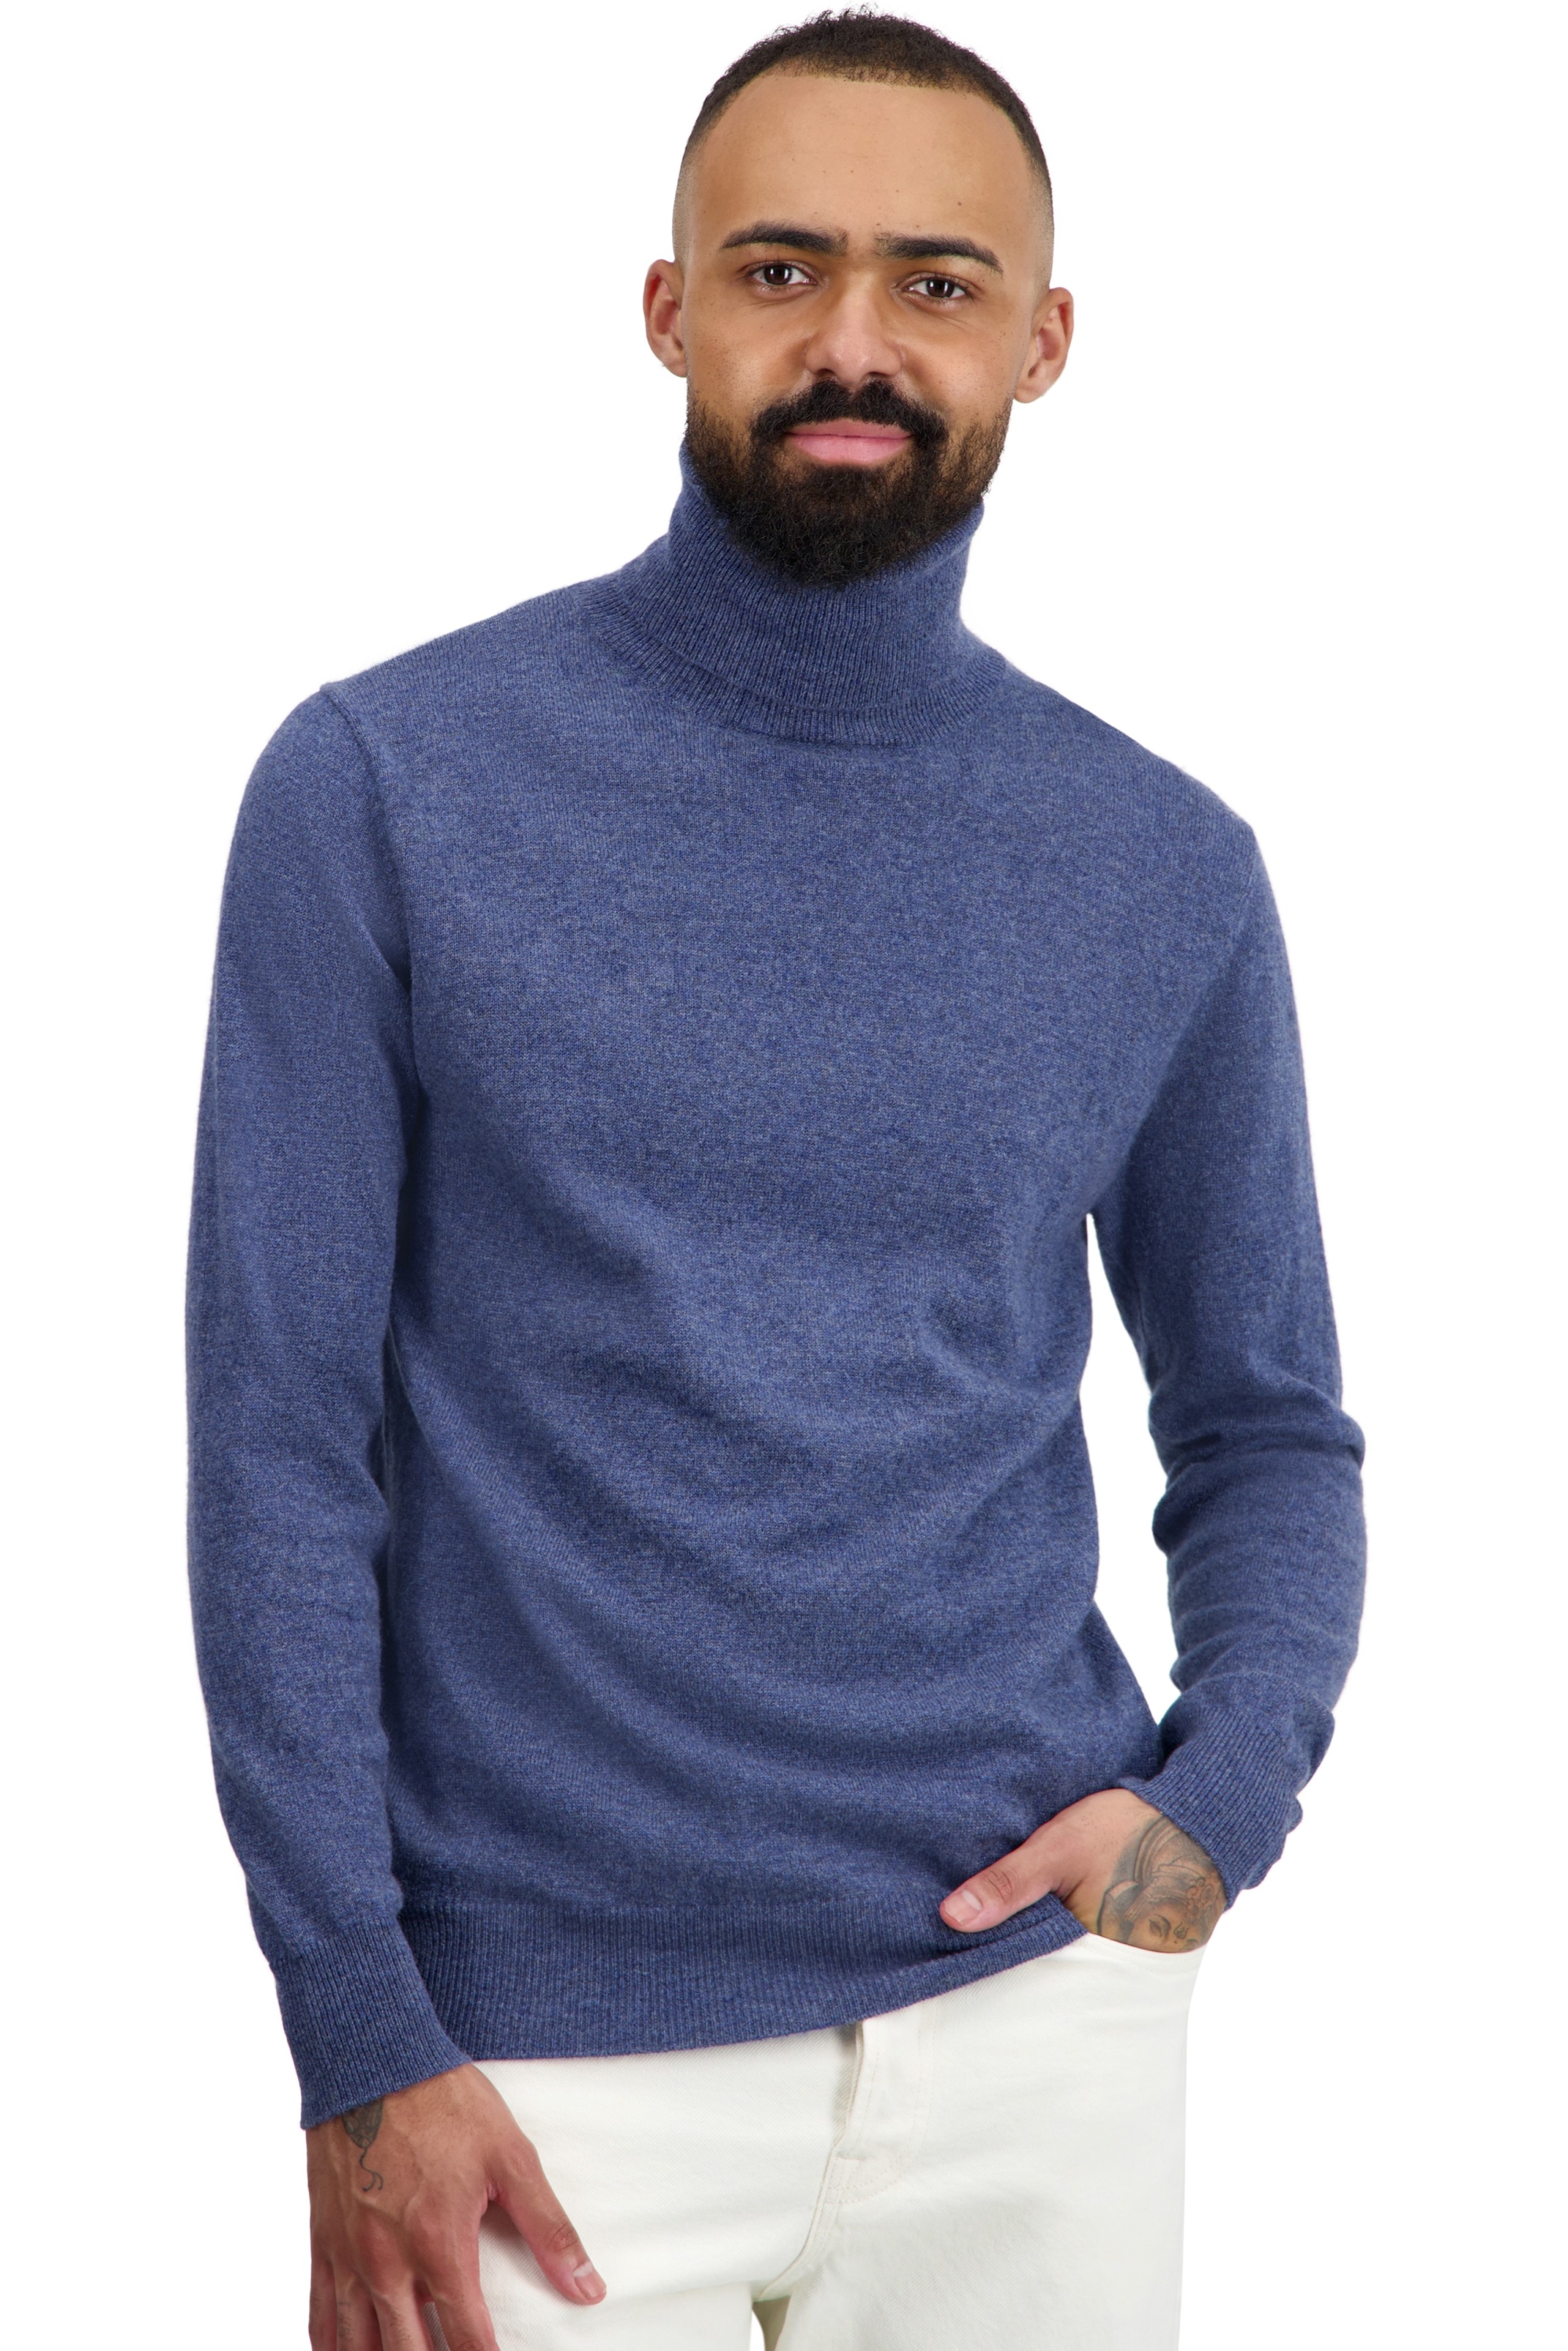 Cashmere men basic sweaters at low prices tarry first nordic blue m